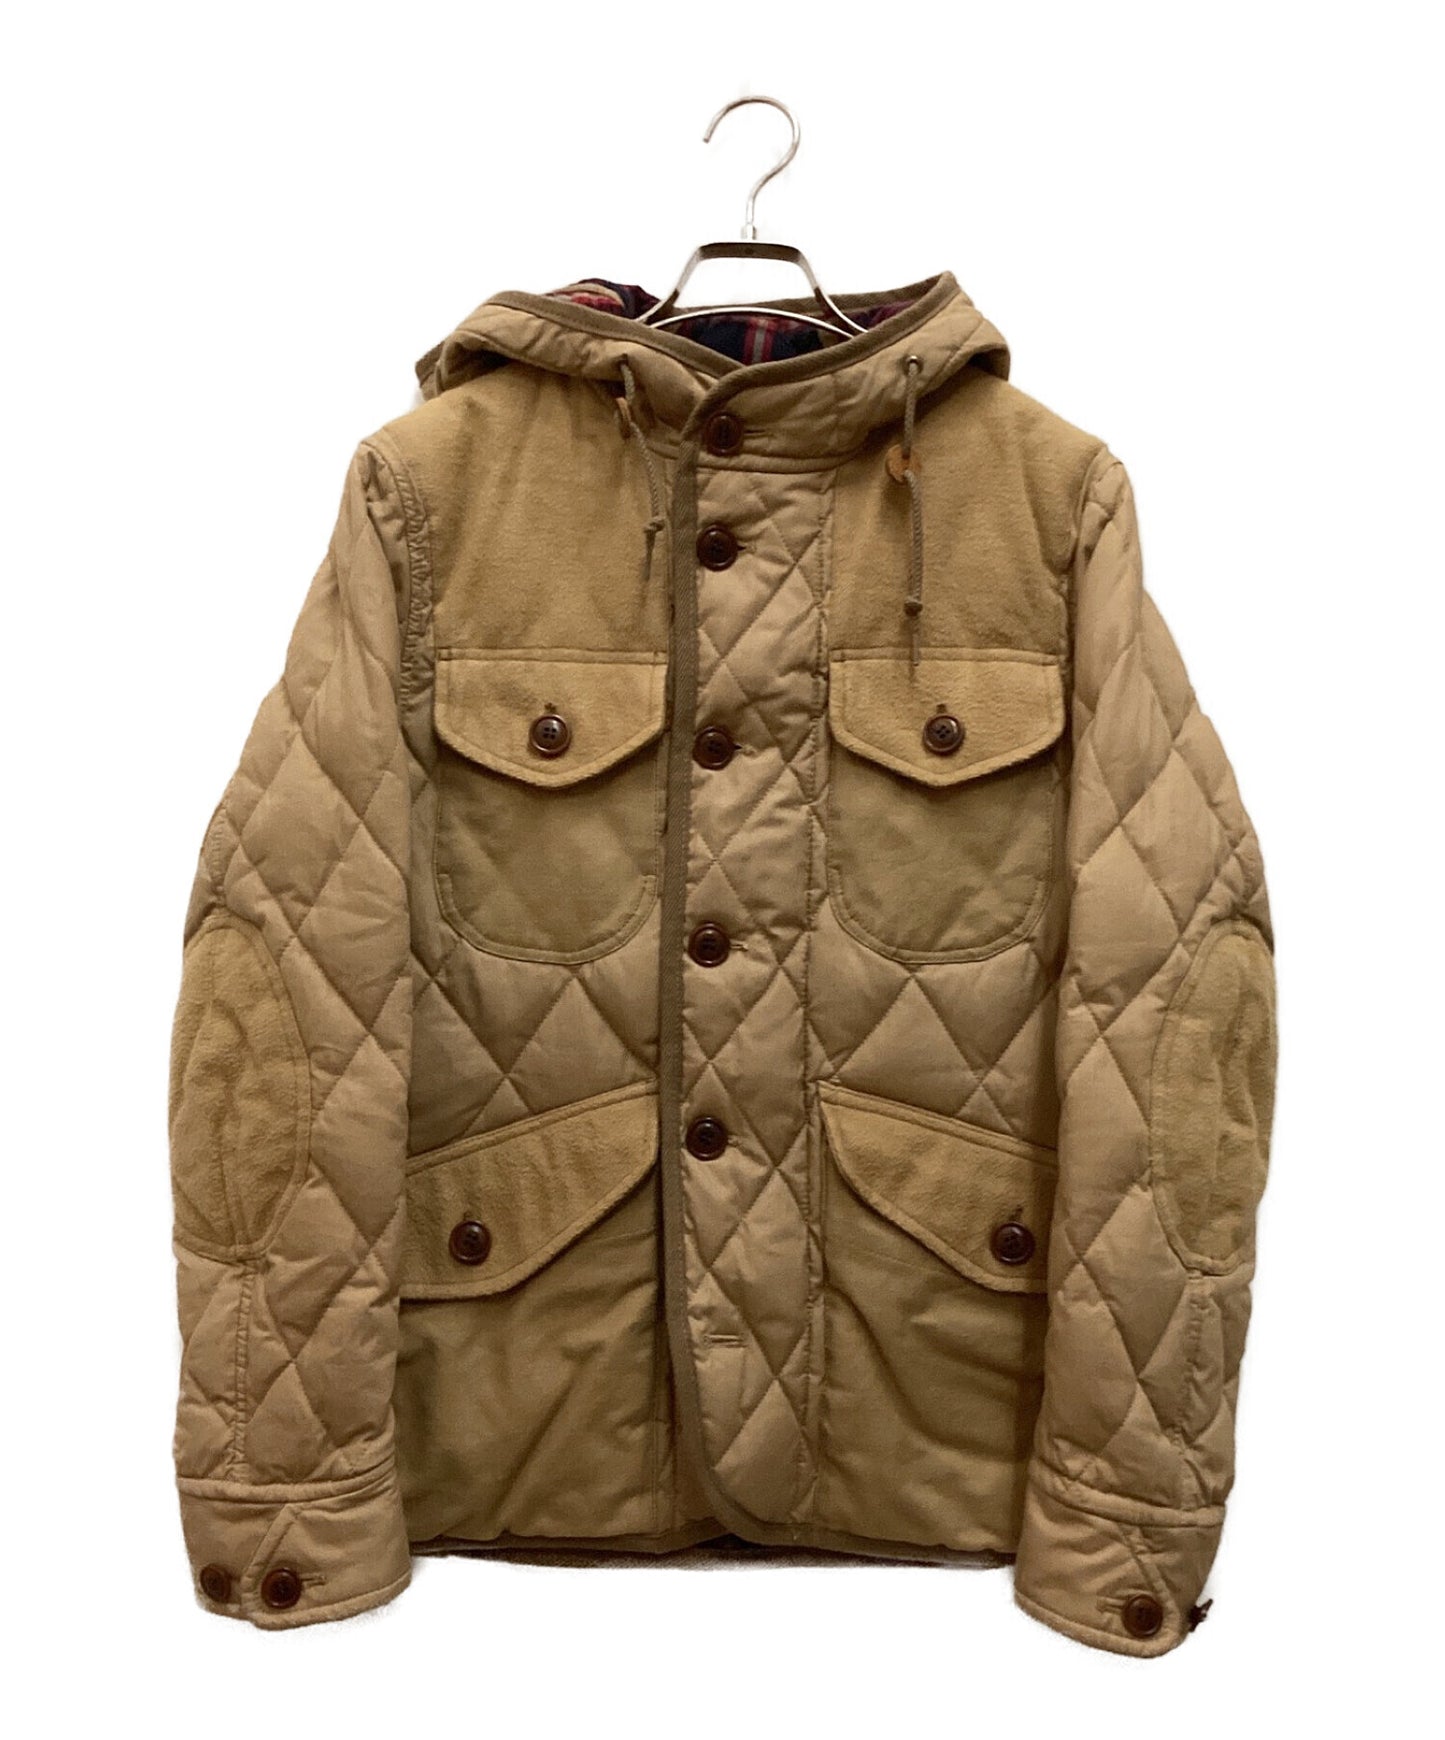 Comme des Garcons Junya Watanabe Man Down Jacket Quilted Switching Hooded Jacket WN-J401